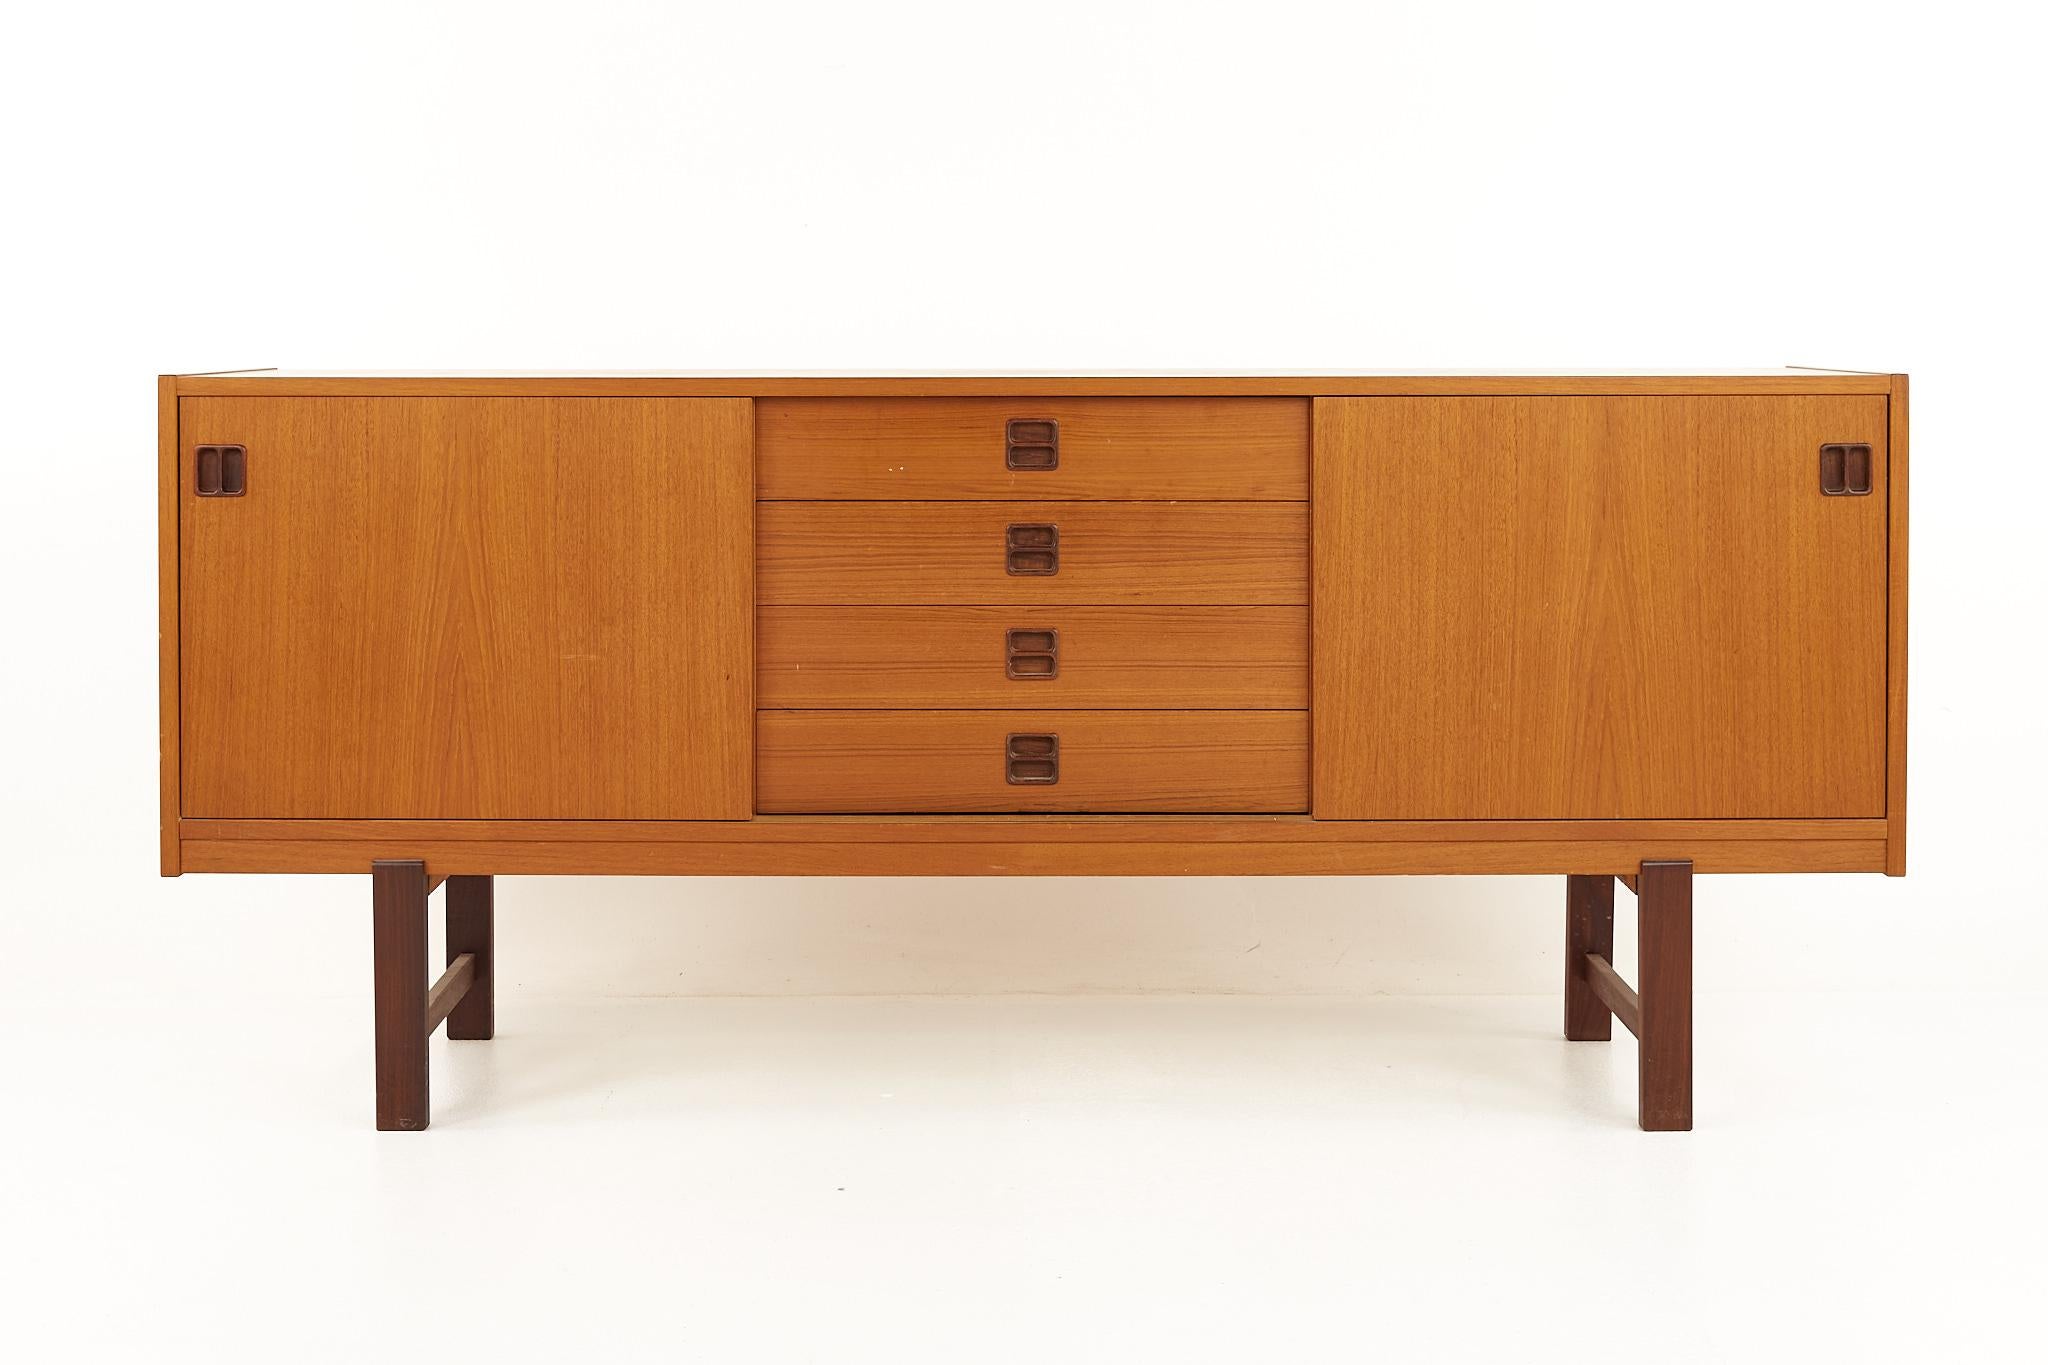 Mid century teak sideboard credenza

This credenza measures: 66.75 wide x 16.5 deep x 29 inches high

All pieces of furniture can be had in what we call restored vintage condition. That means the piece is restored upon purchase so it’s free of